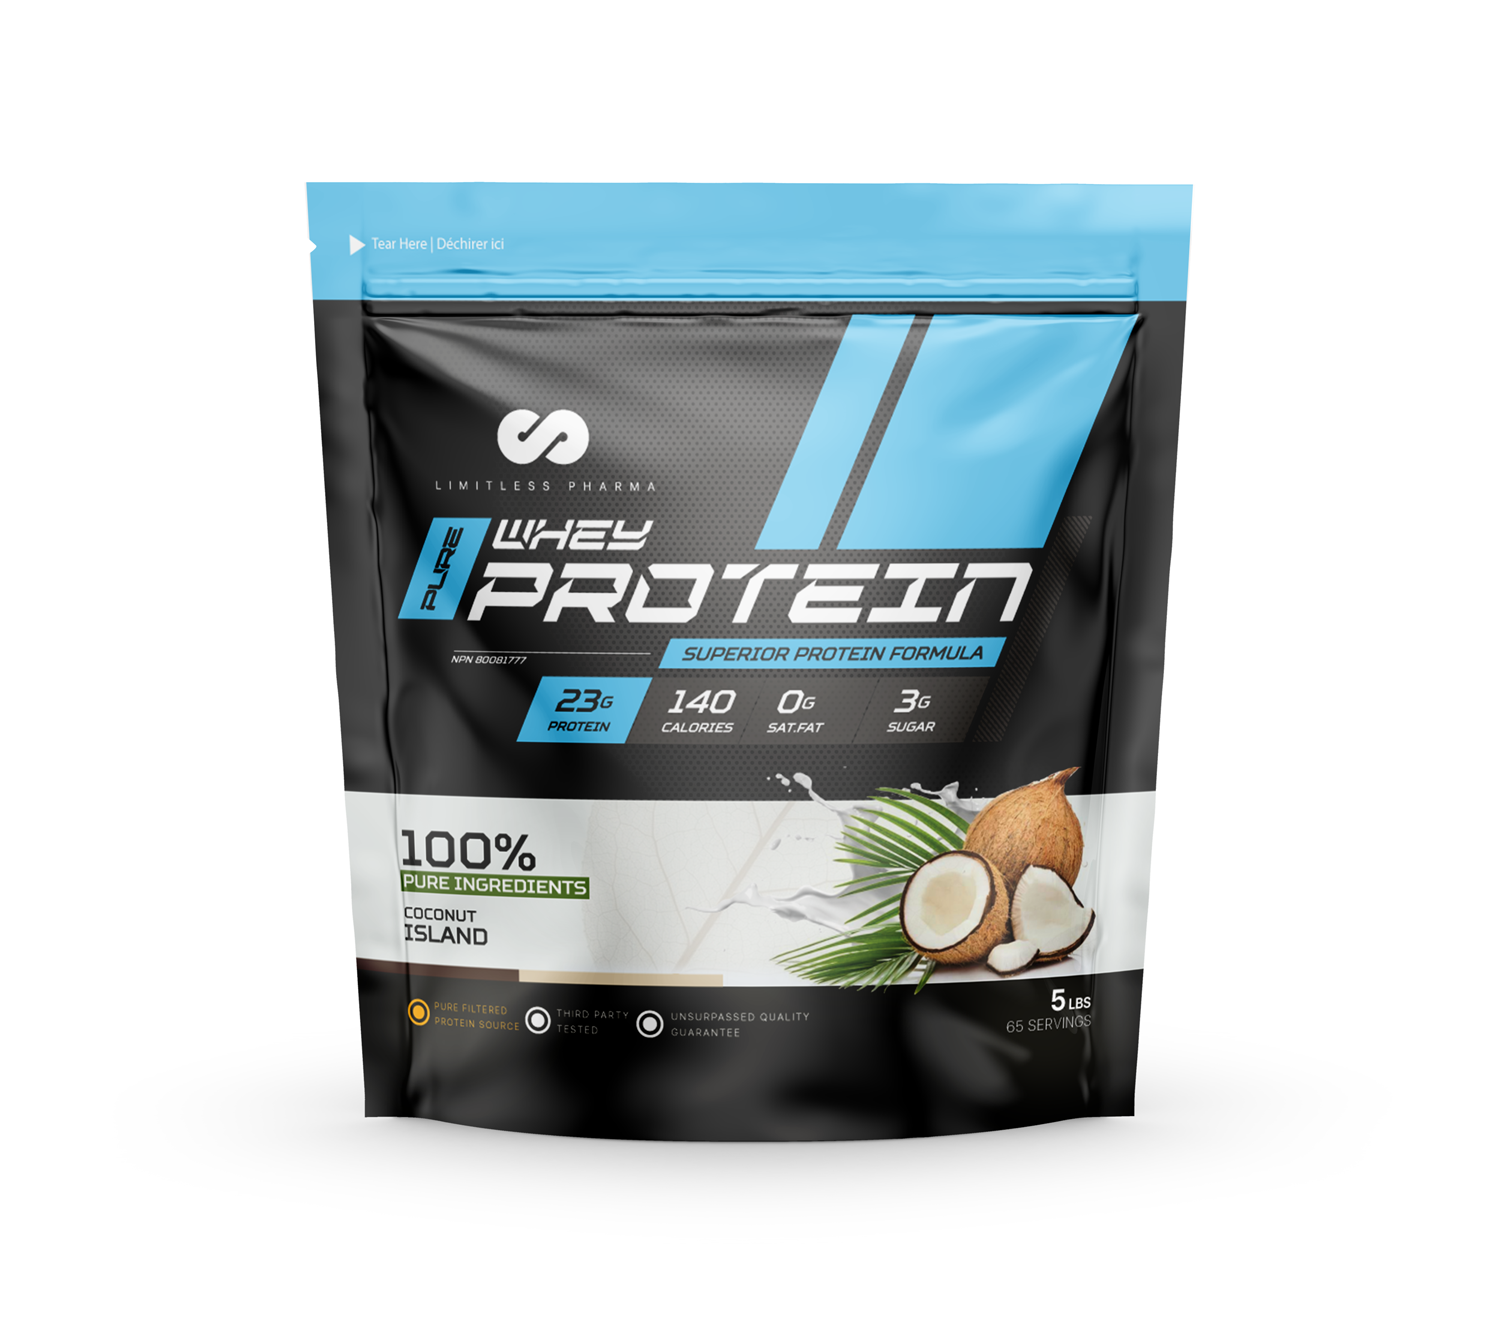 Protein Pure2Improve Iso Tonic Lemon Flavour - Protein - Nutrition